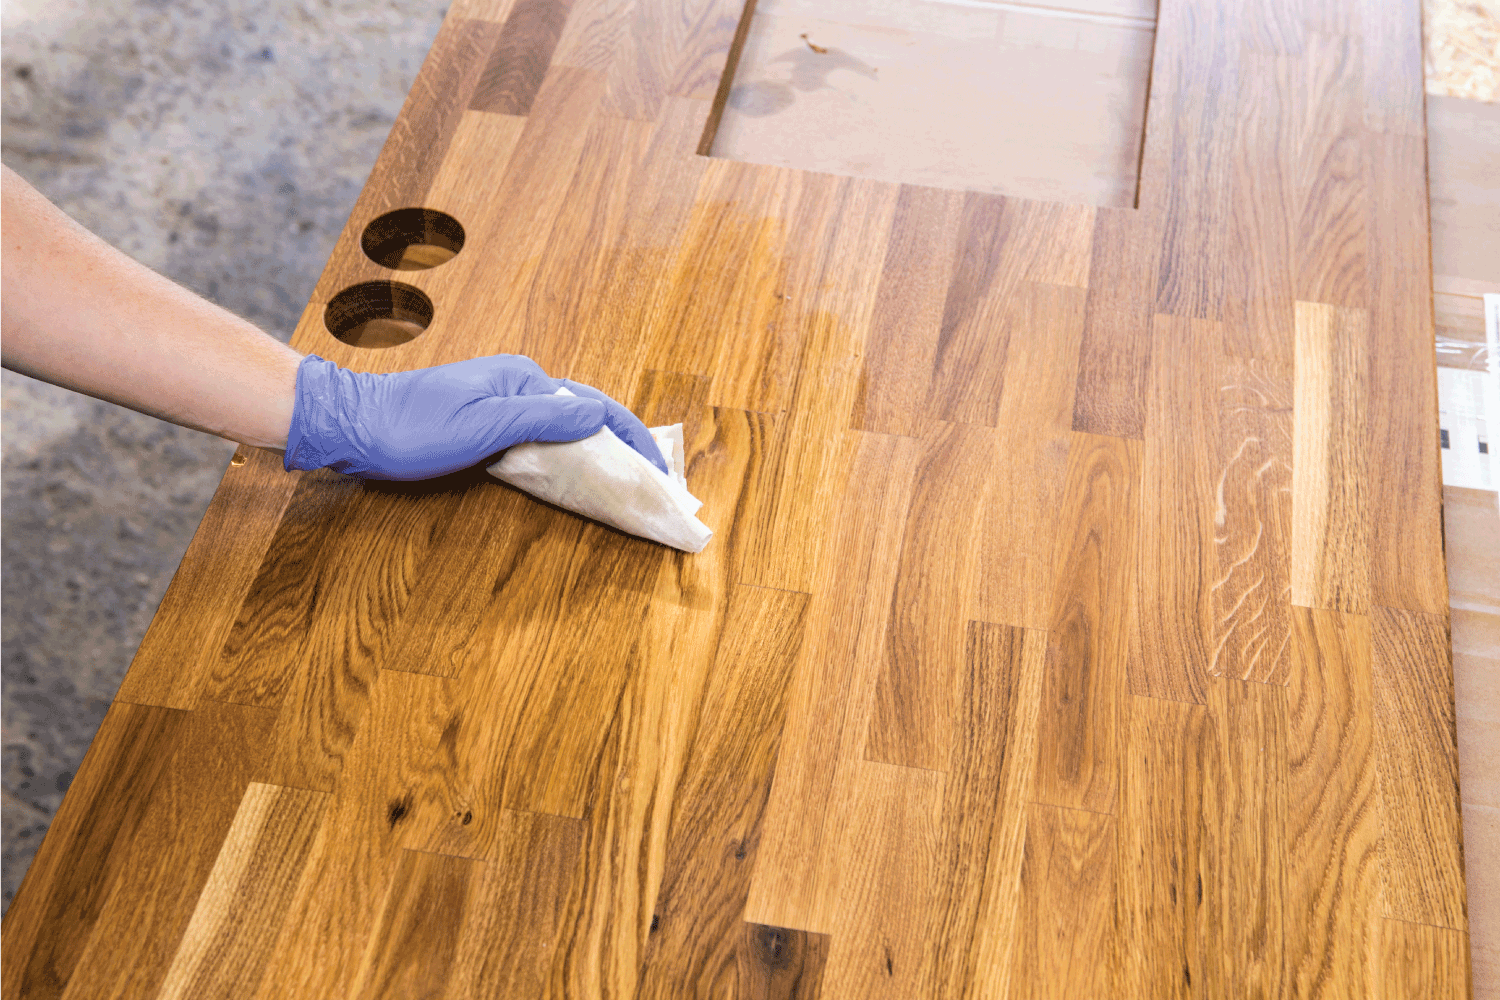 Person working, rubbing oiling with linseed oil natural wooden kitchen countertop before using